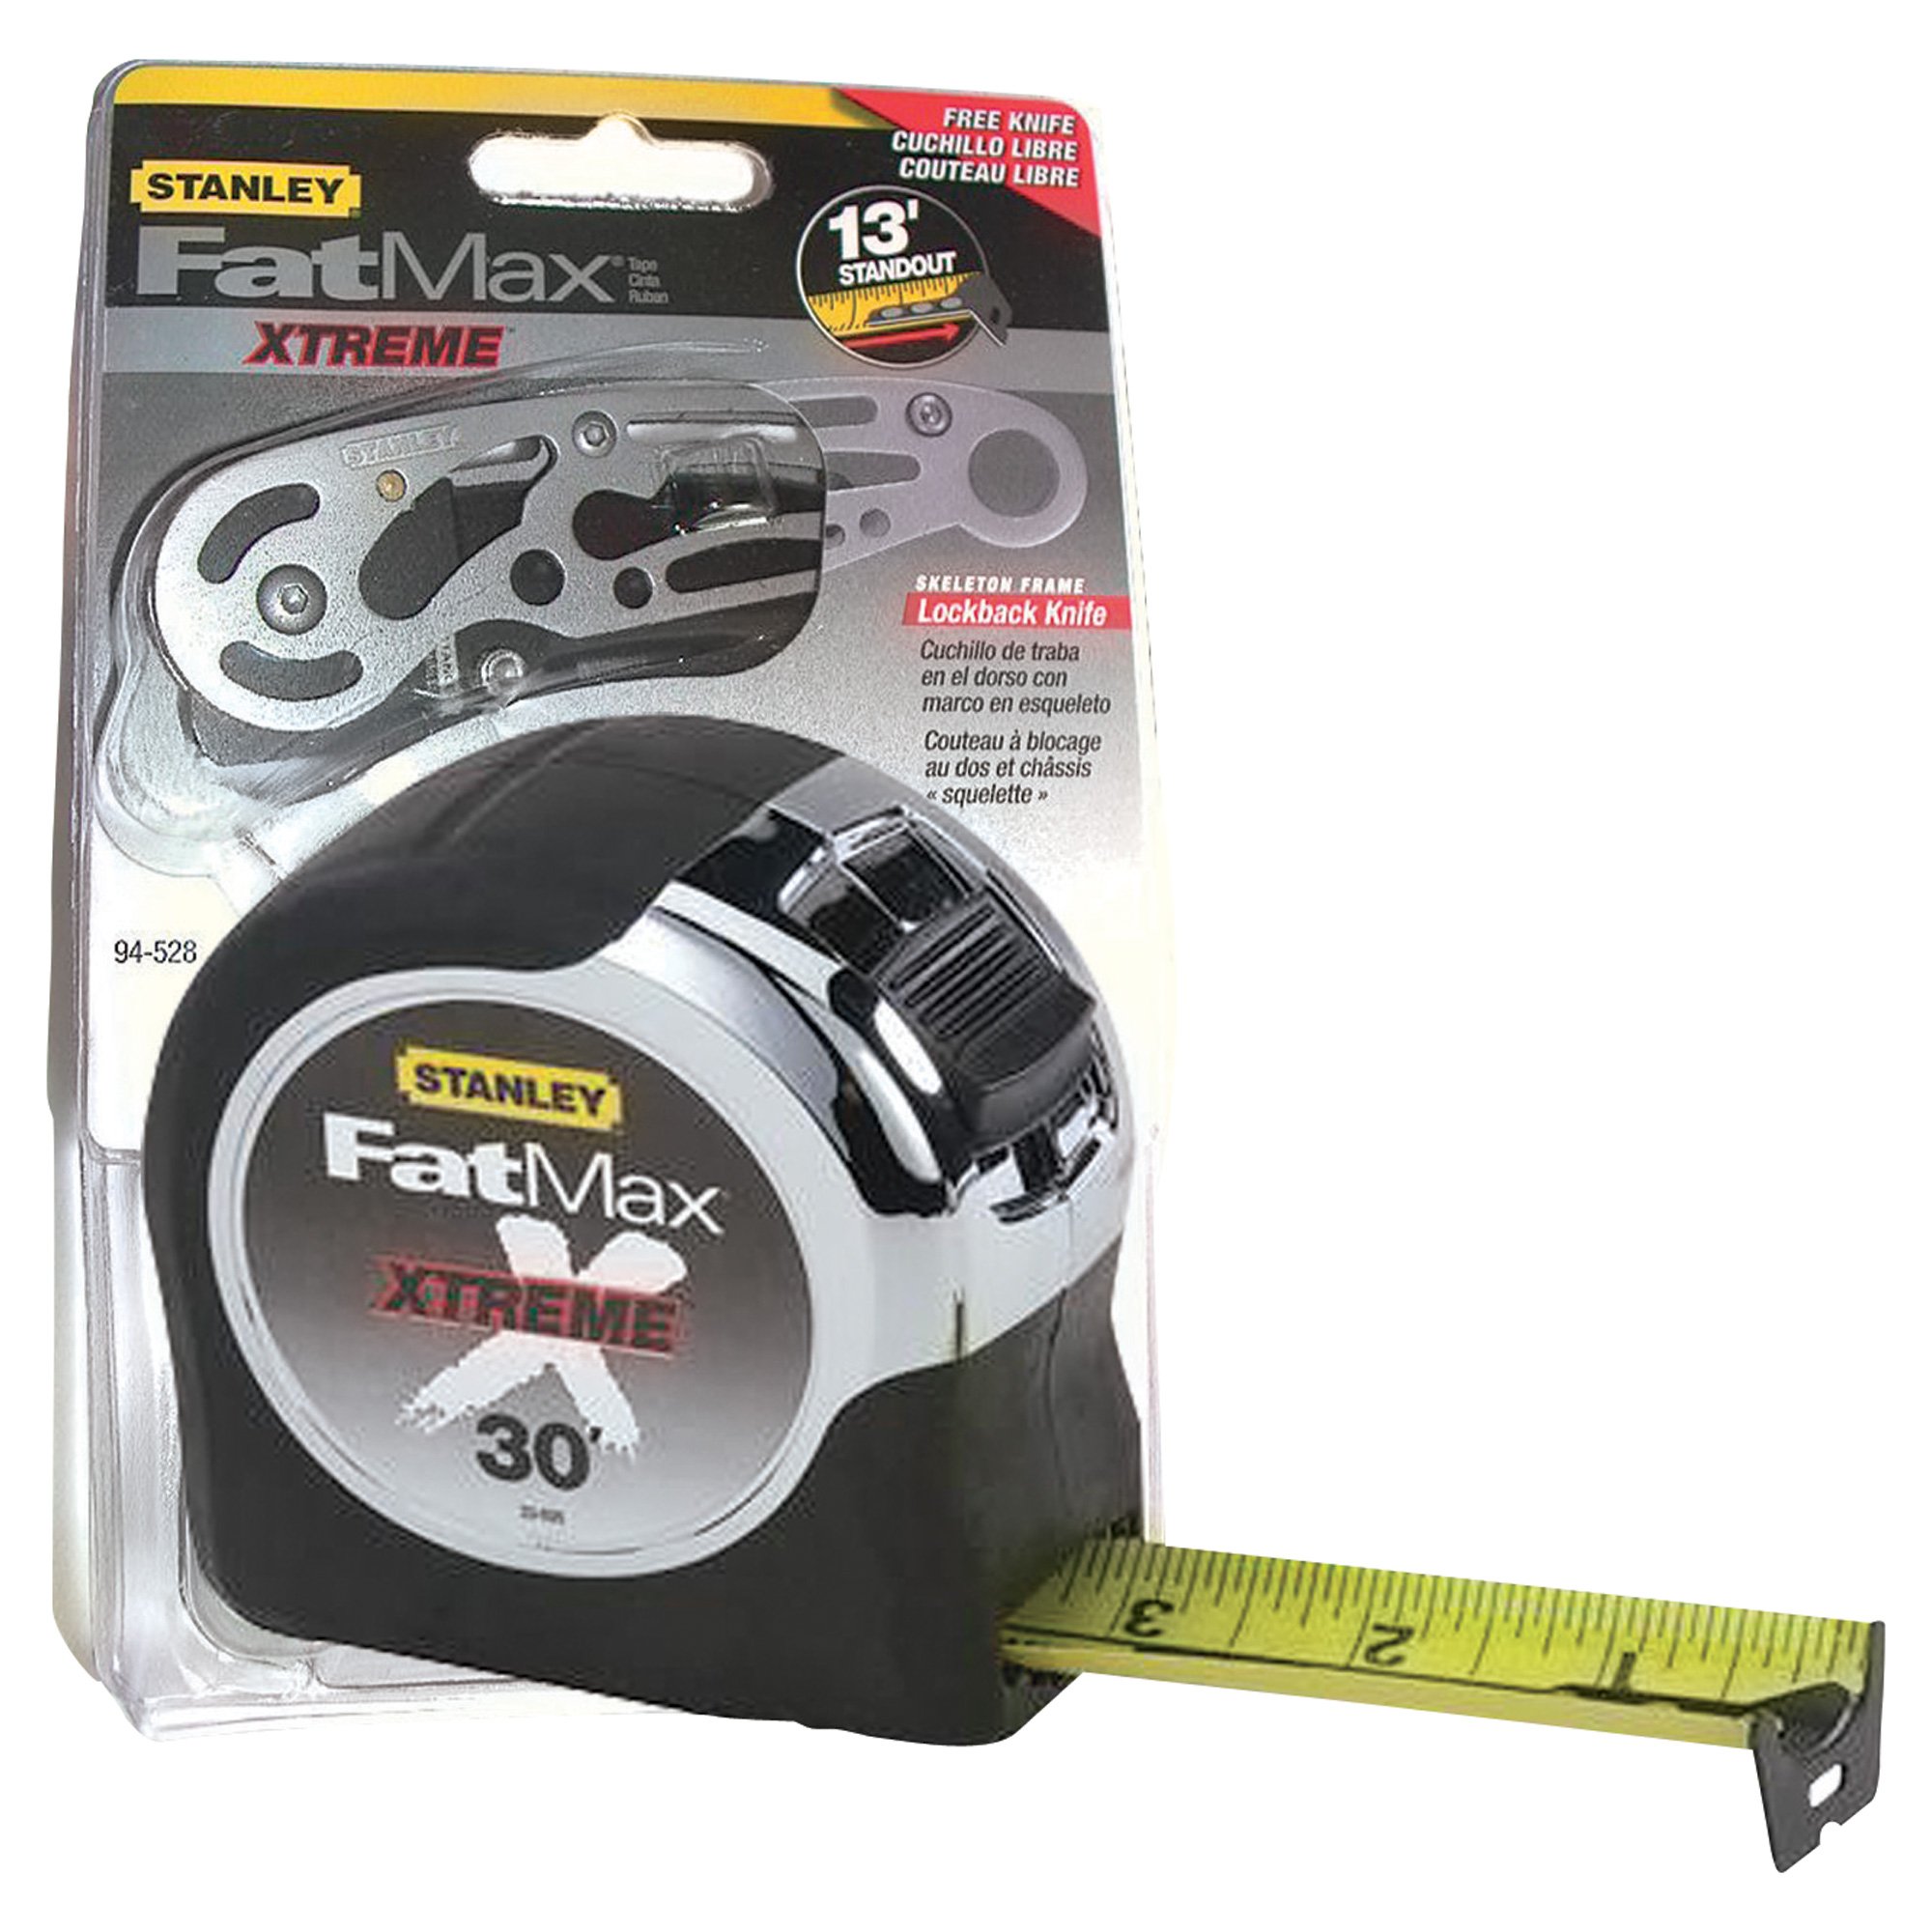 Stanley FatMax Xtreme Tape Measure and FREE Lockback Knife — 30Ft. x 1  3/4in., Model# 94-528